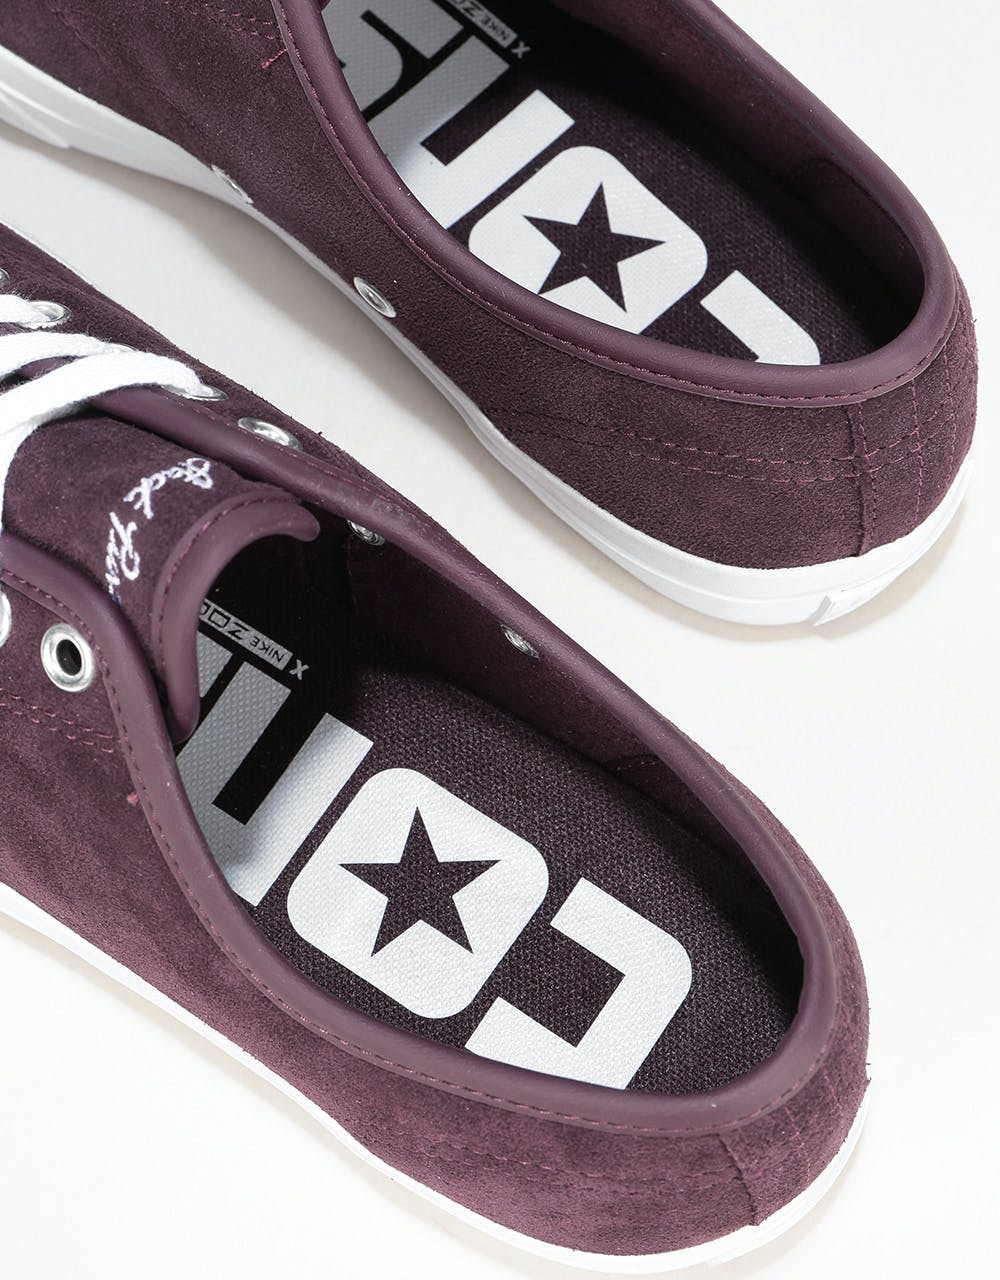 Converse Jack Purcell Pro Ox Skate Shoes - Black Cherry/White/White